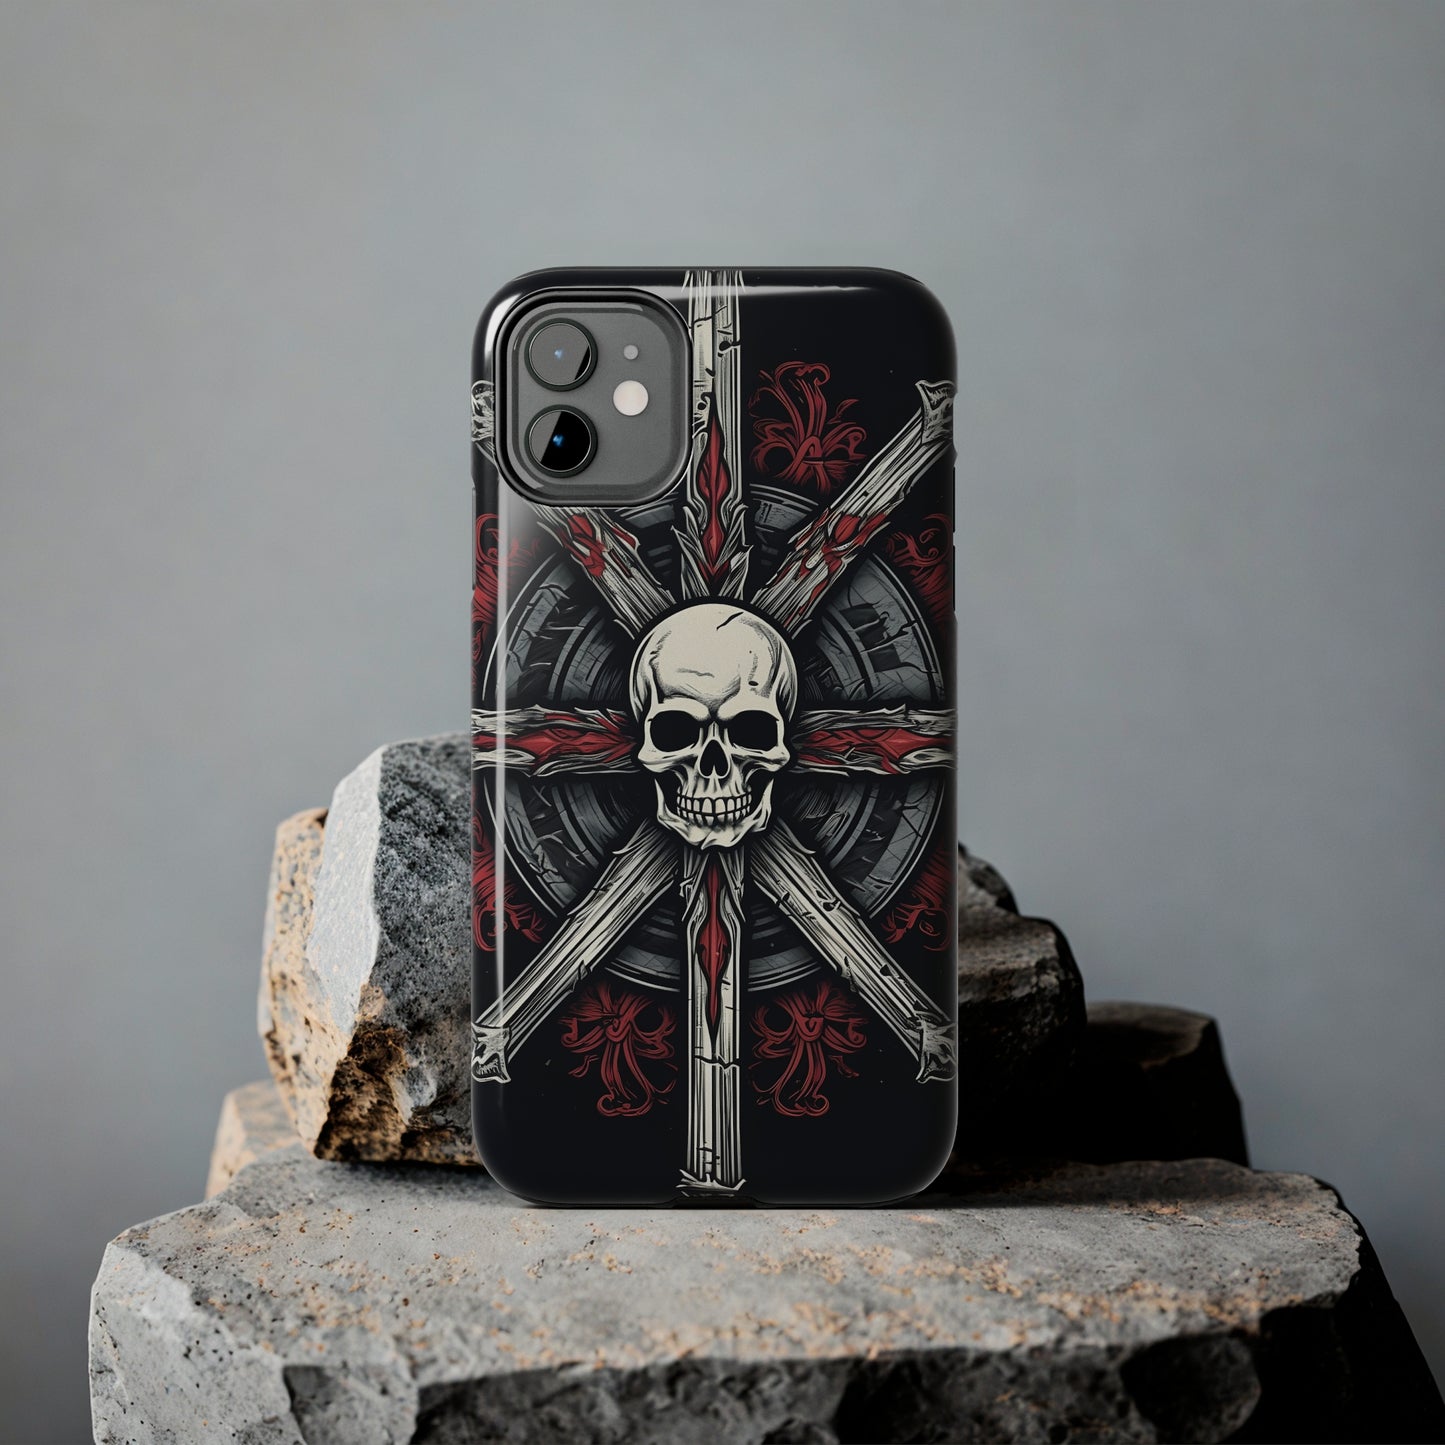 Skull on Circle - Protective iPhone Cases